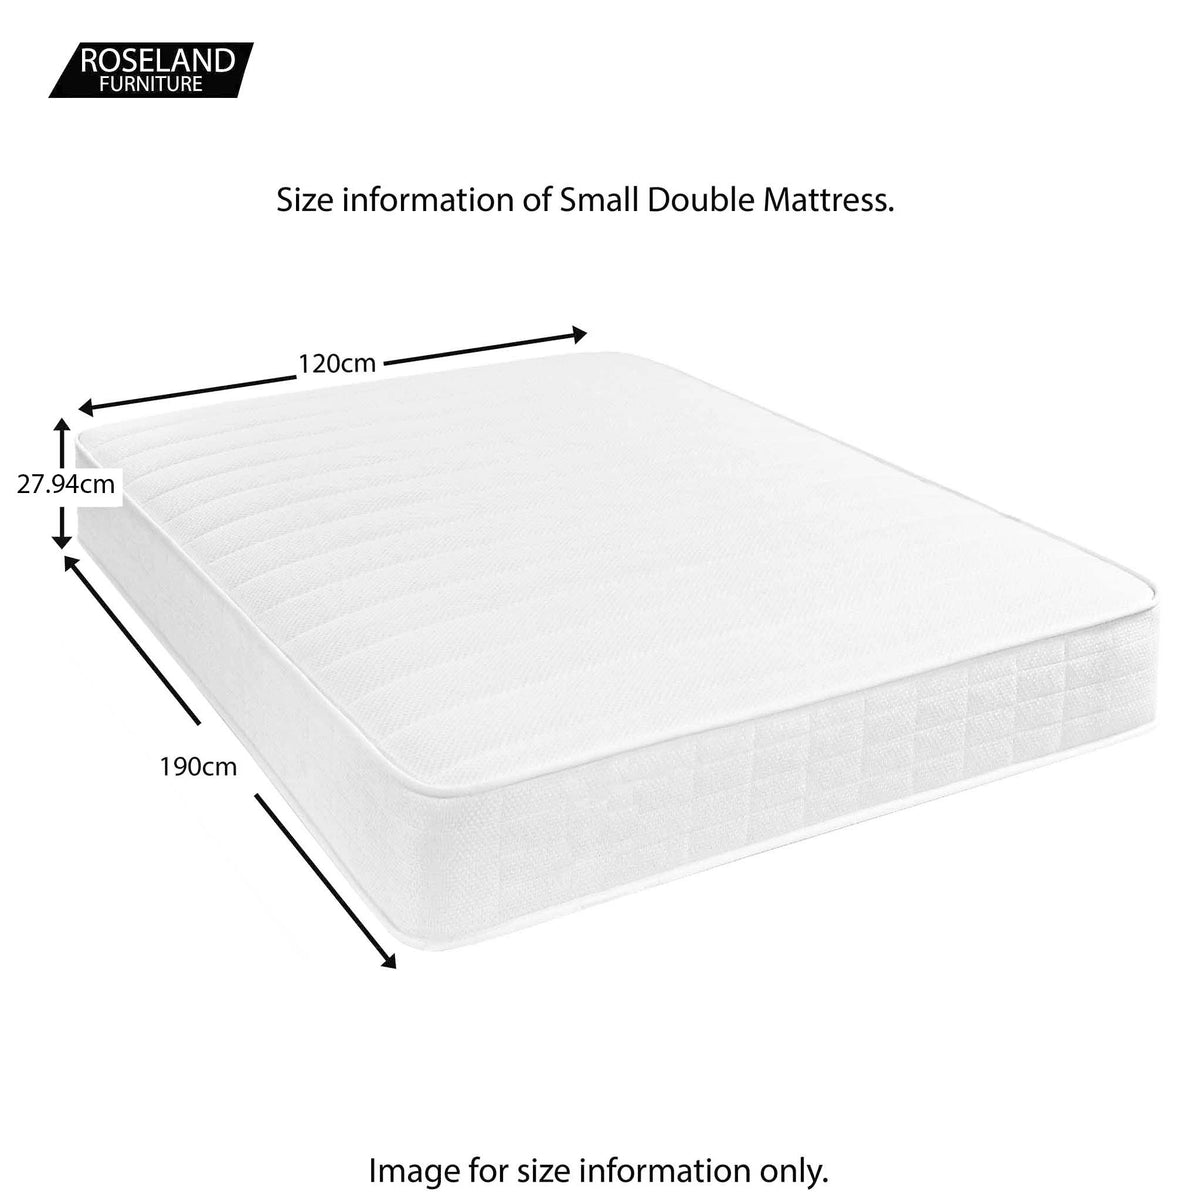 Roseland Sleep Sicily - Small Double Size Guide